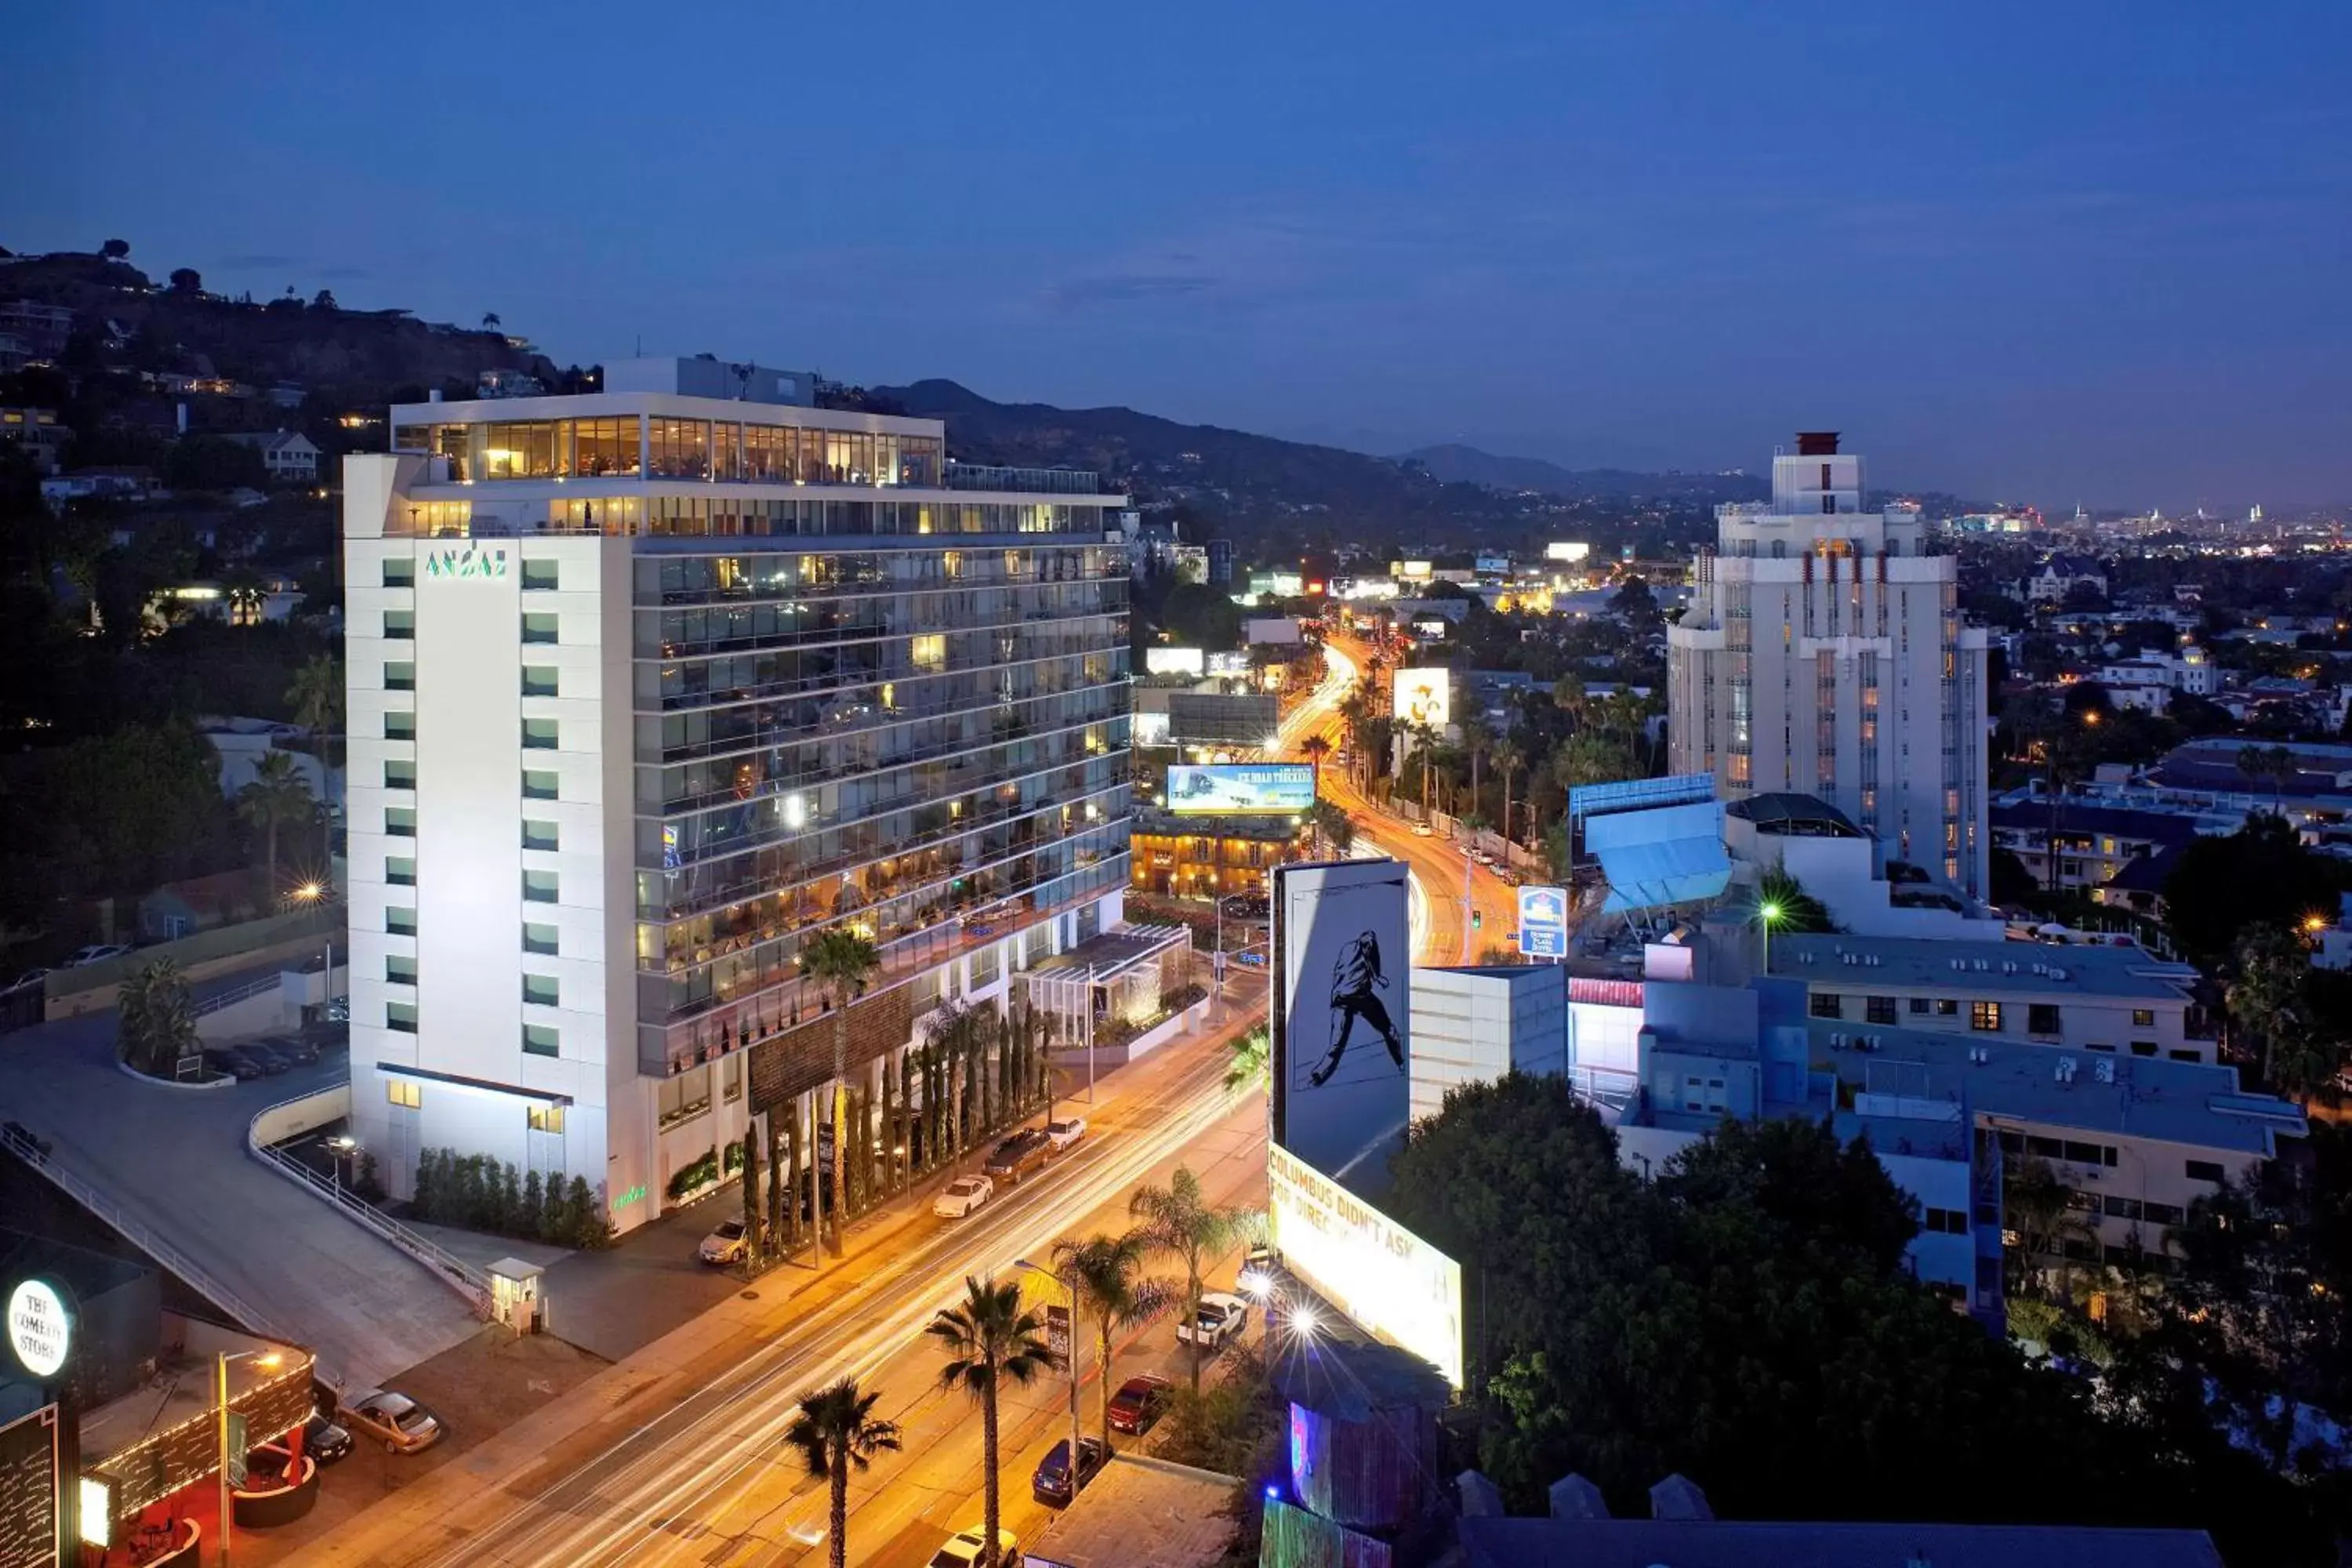 Off site in Andaz West Hollywood-a concept by Hyatt